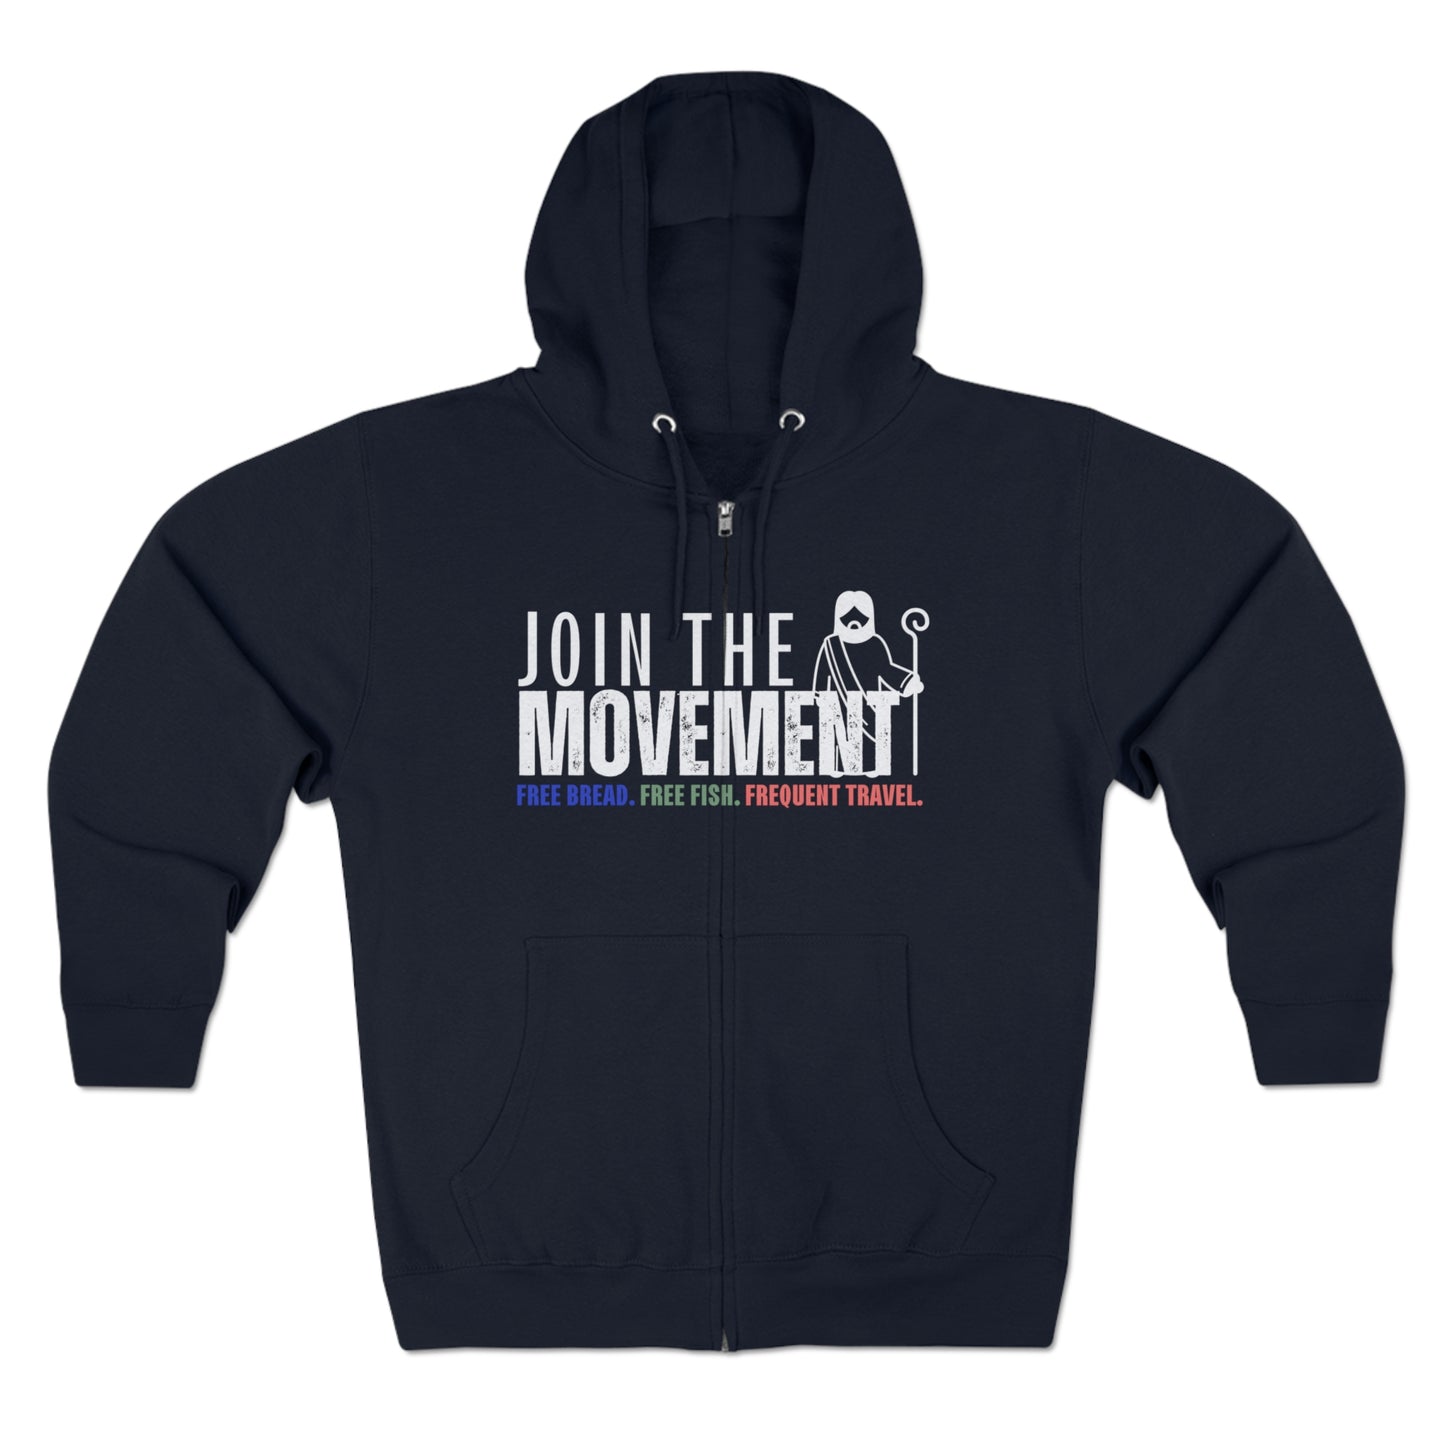 Join the Movement, Christian Zip Hoodie for Men and Women